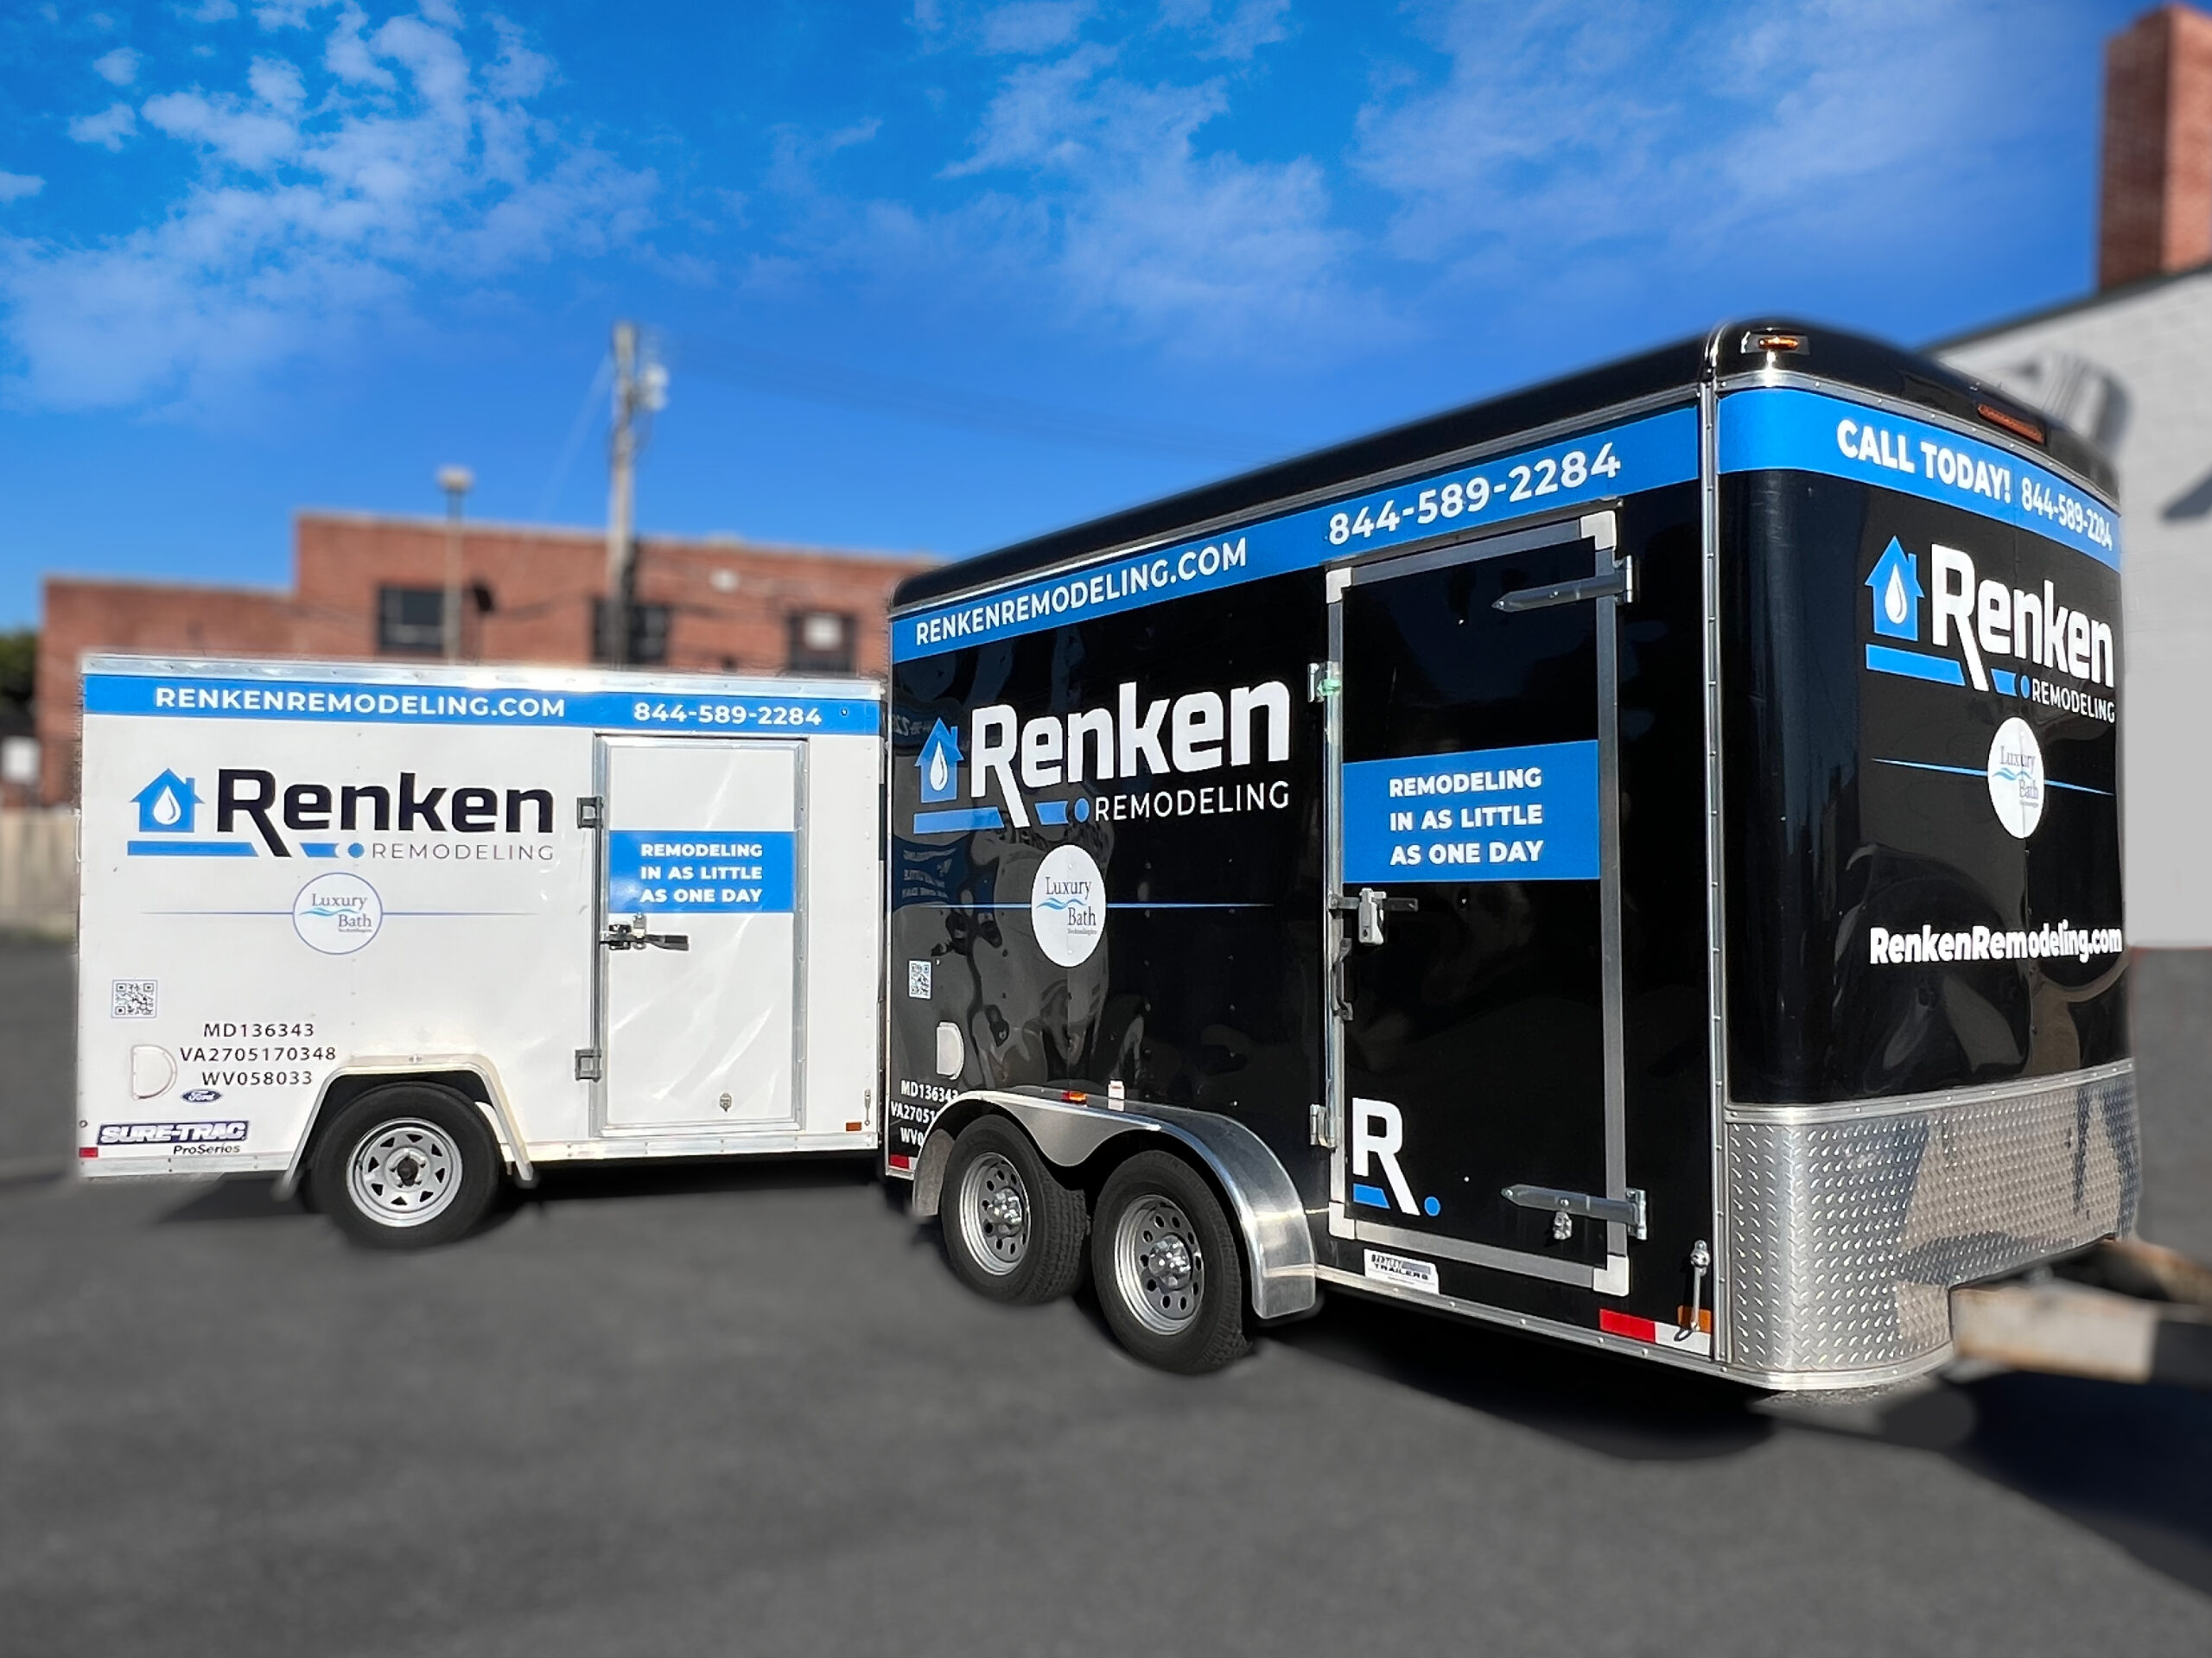 one black and one white renken remodeling trailers